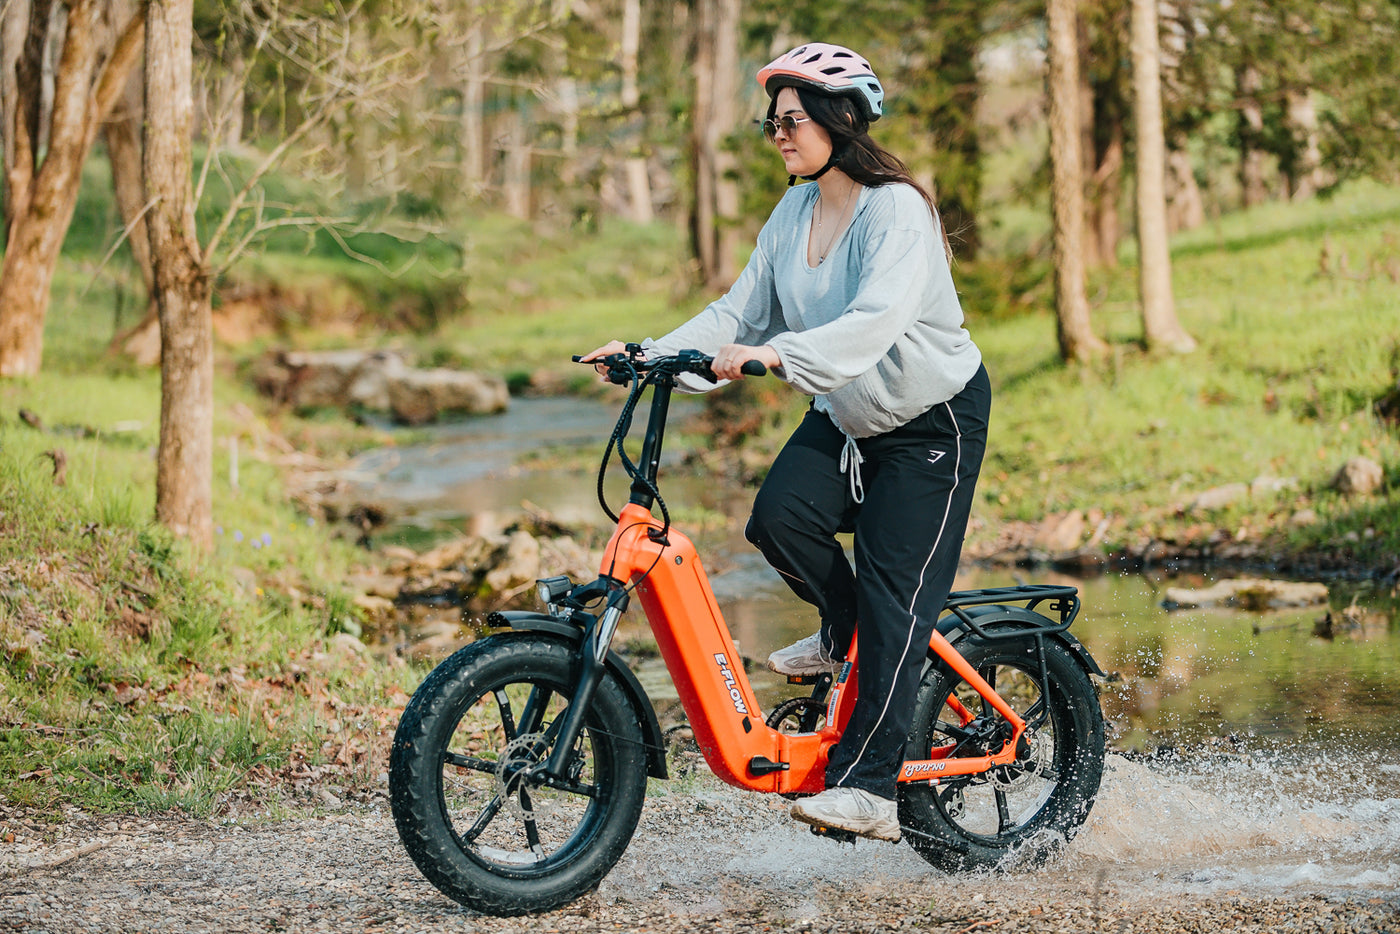 Young Electric Canada | E-Flow 500W Folding eBike | 20'' All-terrain Fat Tire With 48V20Ah BAFANG Battery